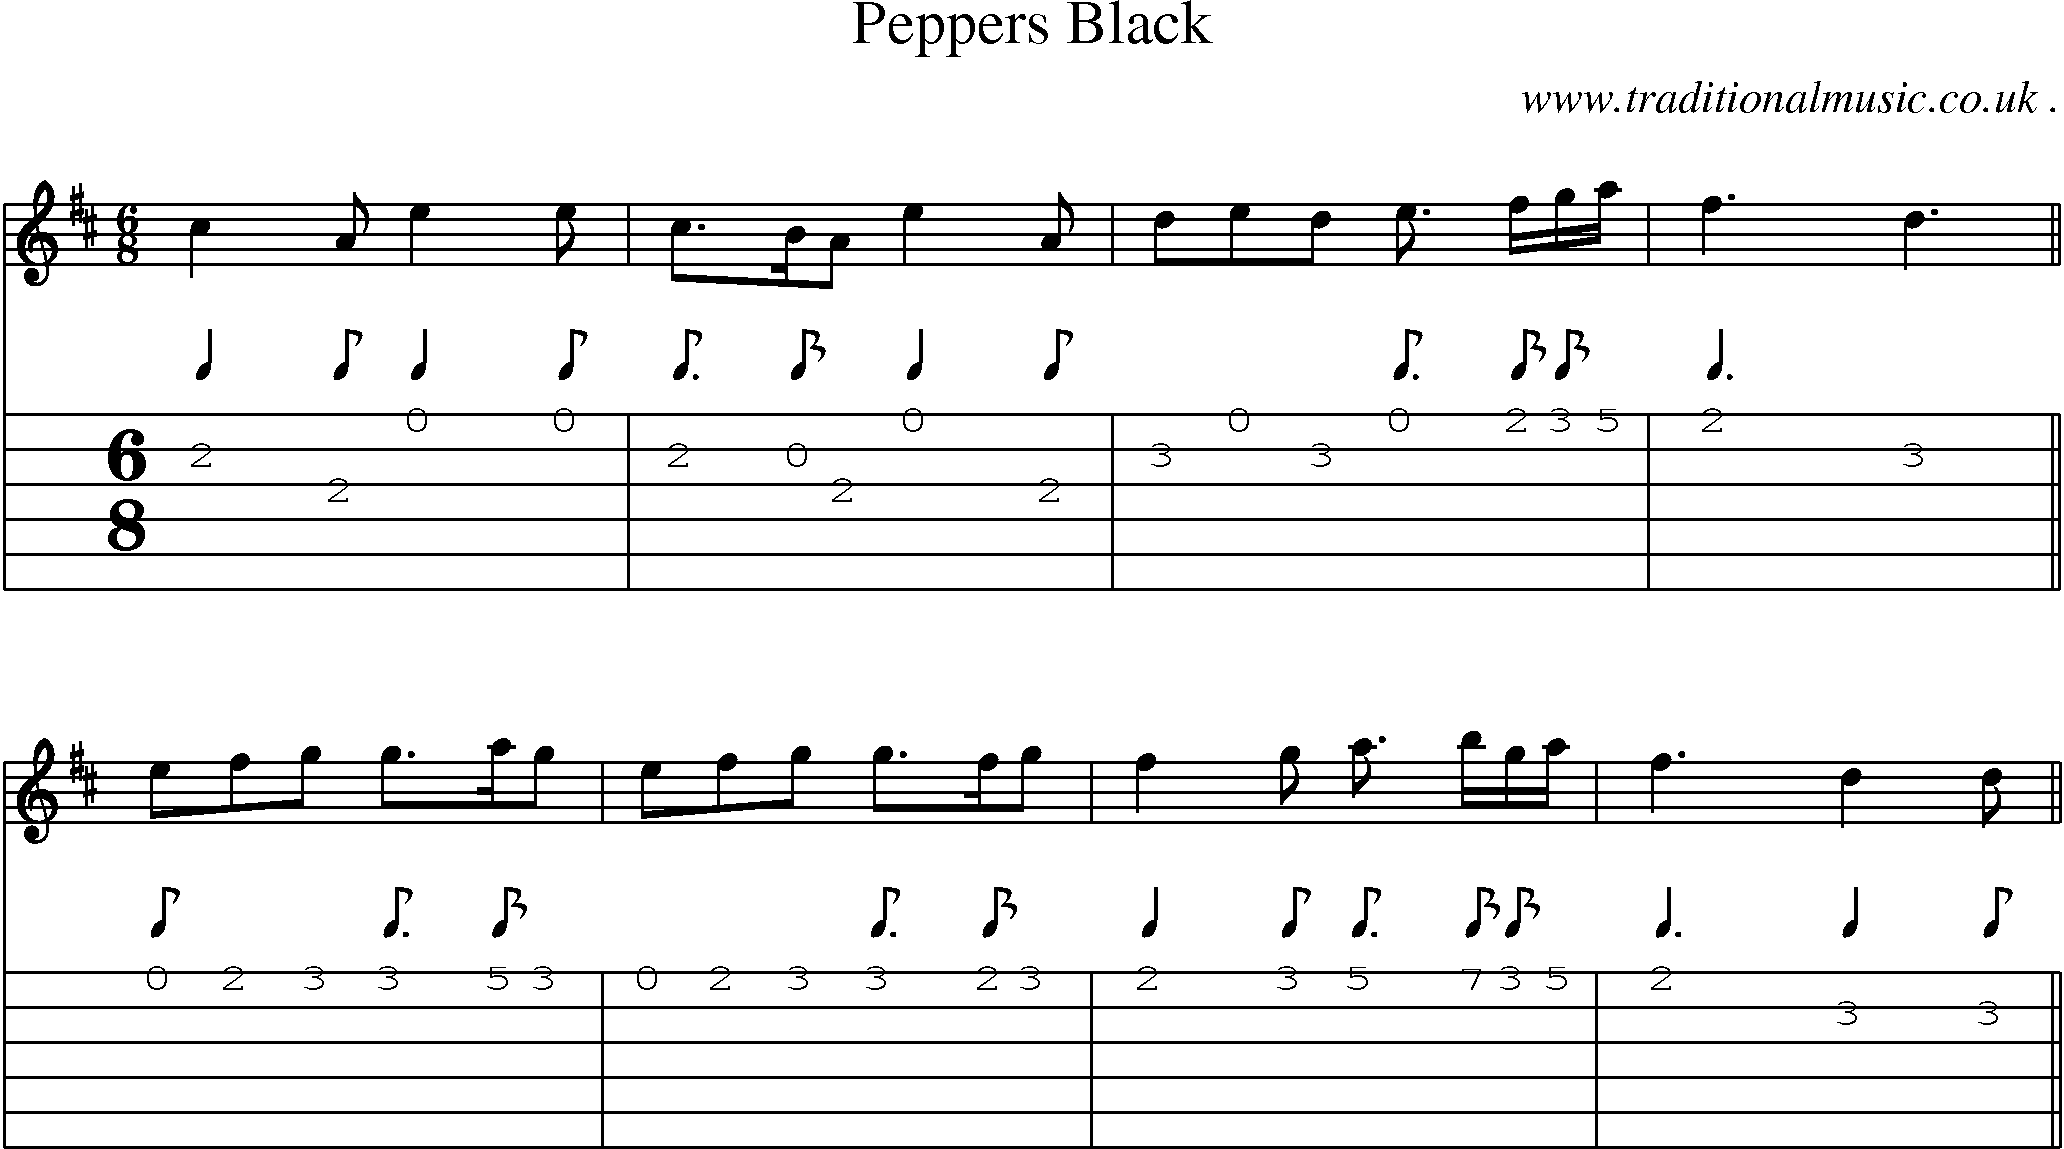 Sheet-Music and Guitar Tabs for Peppers Black